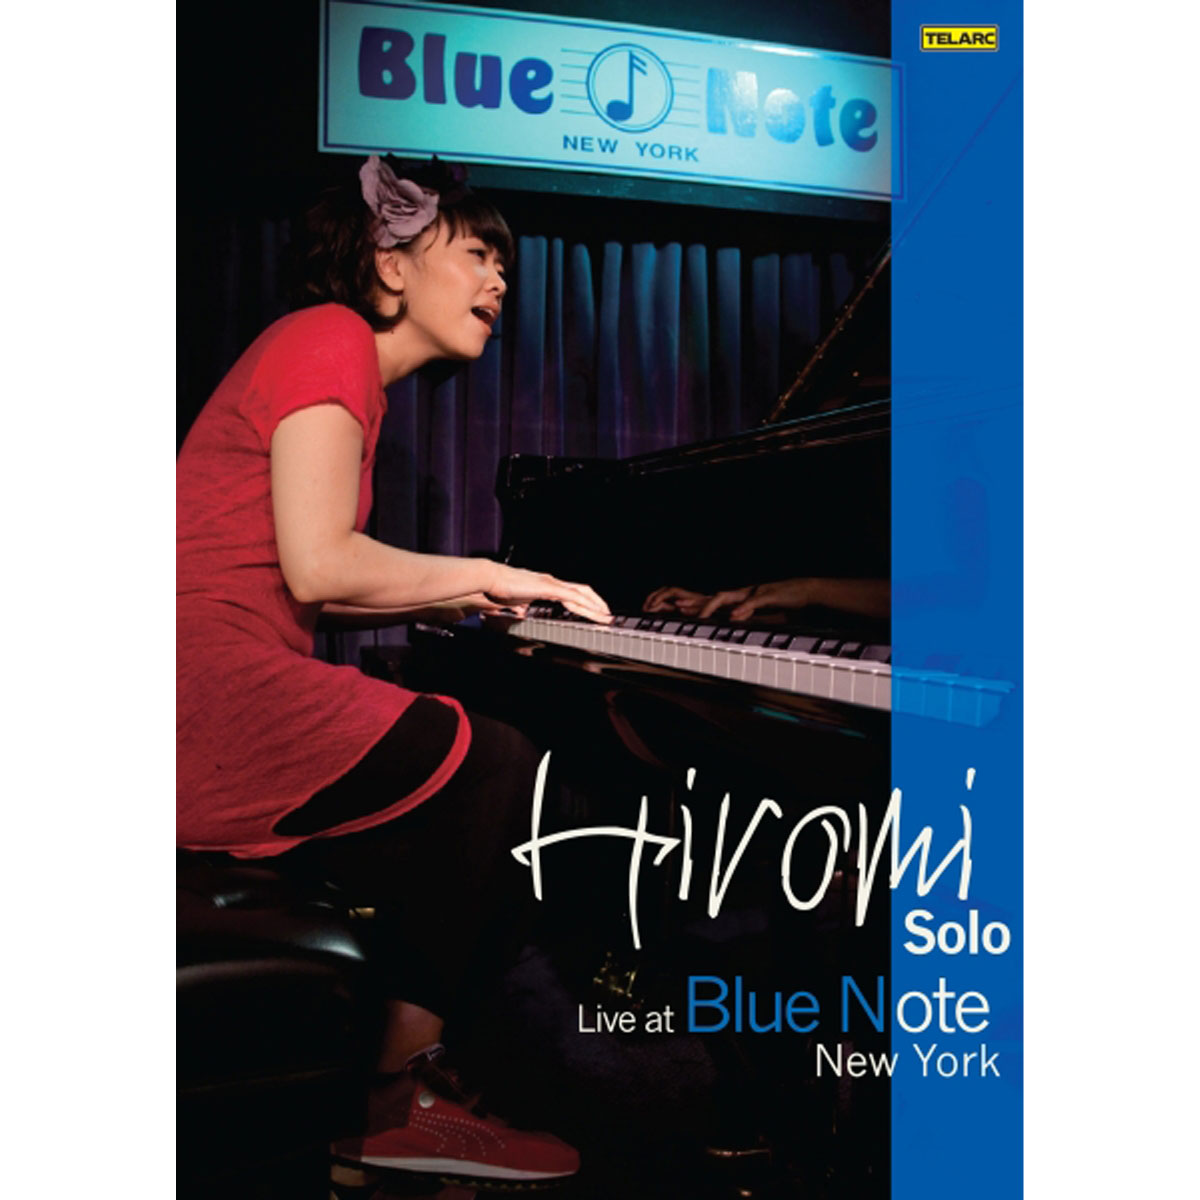 Solo - Live at Blue Note New York